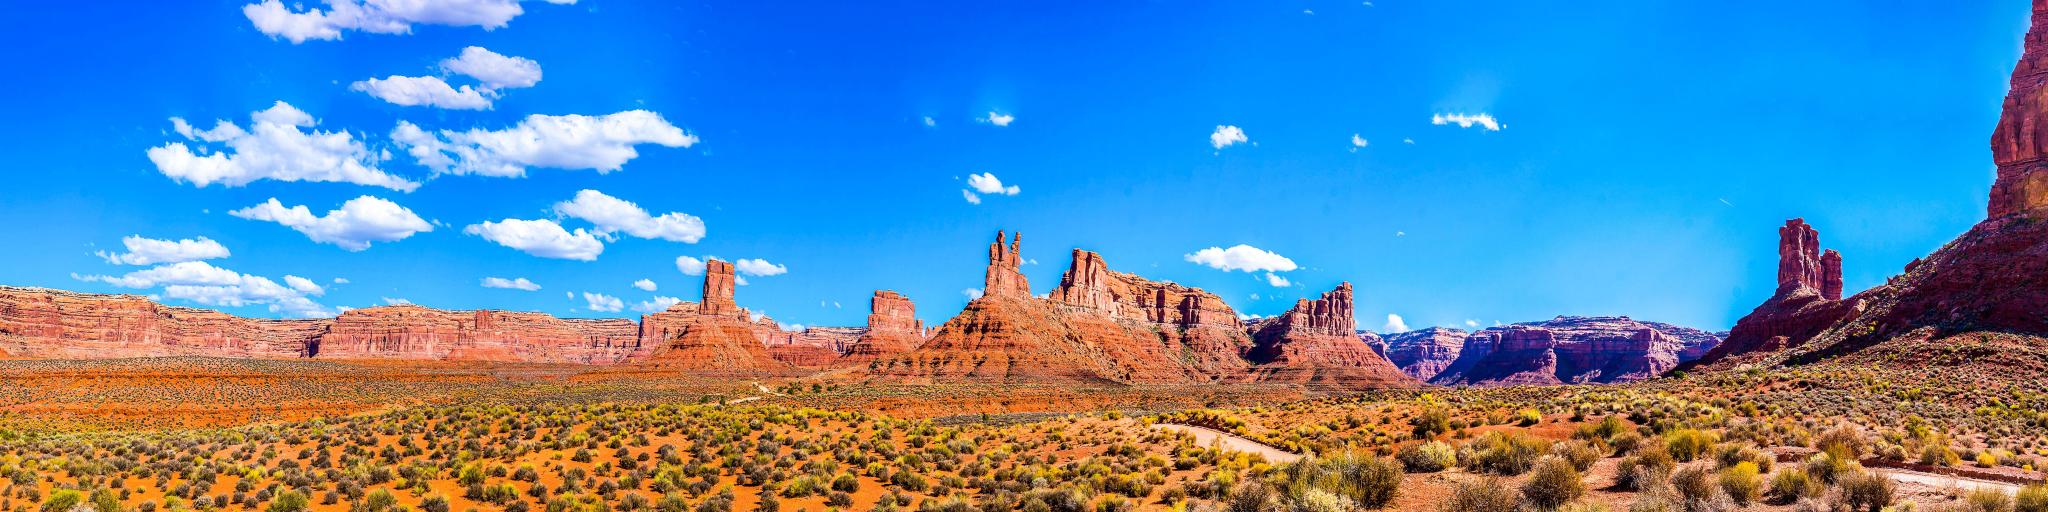 Red rock canyon desert in Nevada panoramic landscape against a blue sky.